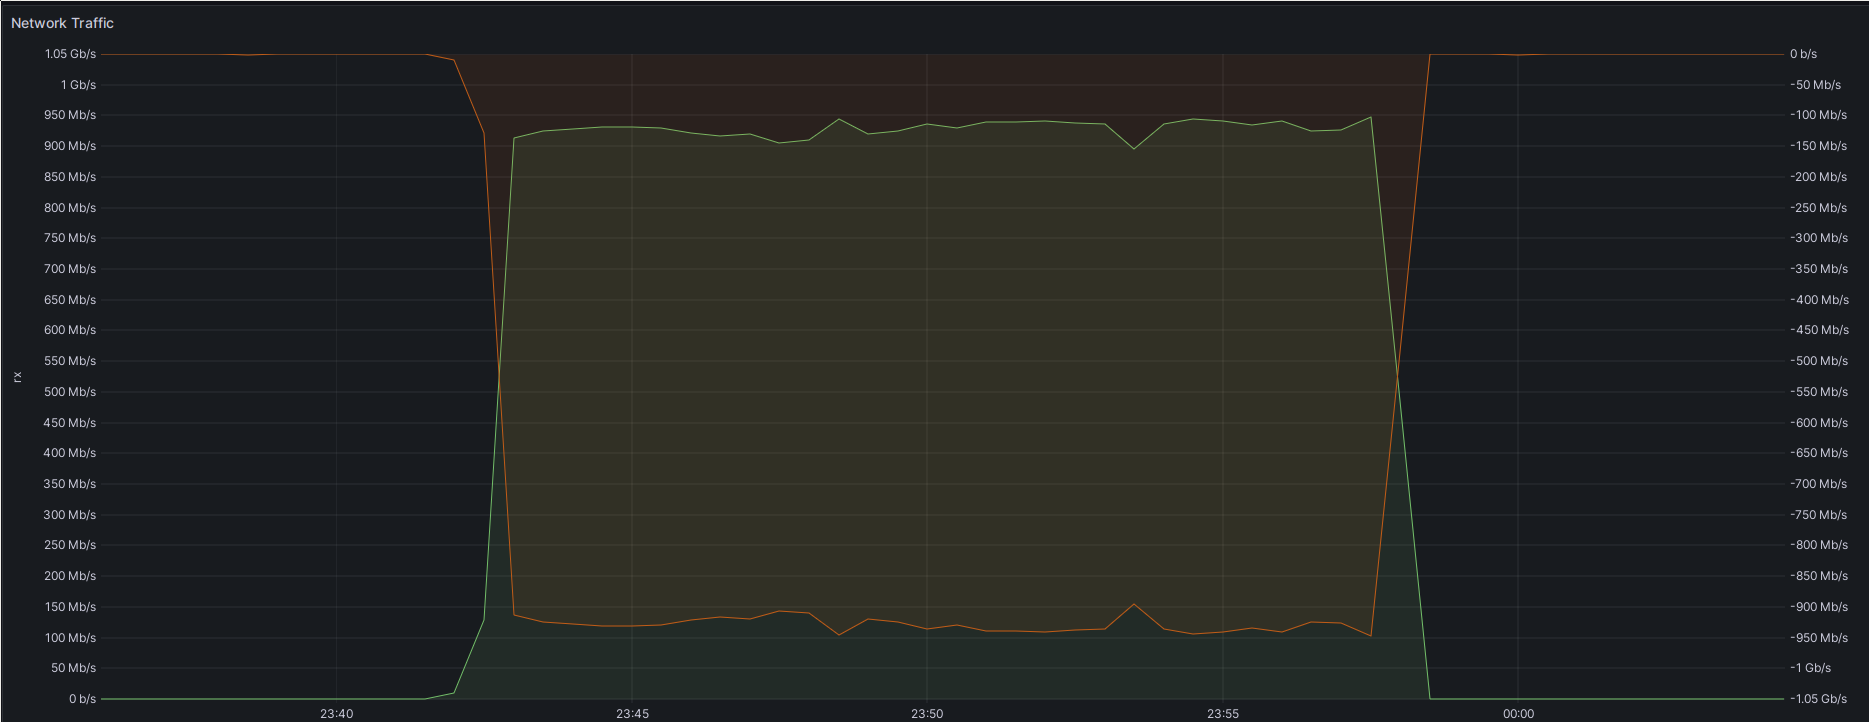 A screenshot of a Grafana visualization. On the x axis is time, and on the y axis is traffic in Mbit/s. For about 15 minutes, rx and tx traffic of about 940 Mbit/s can be seen.